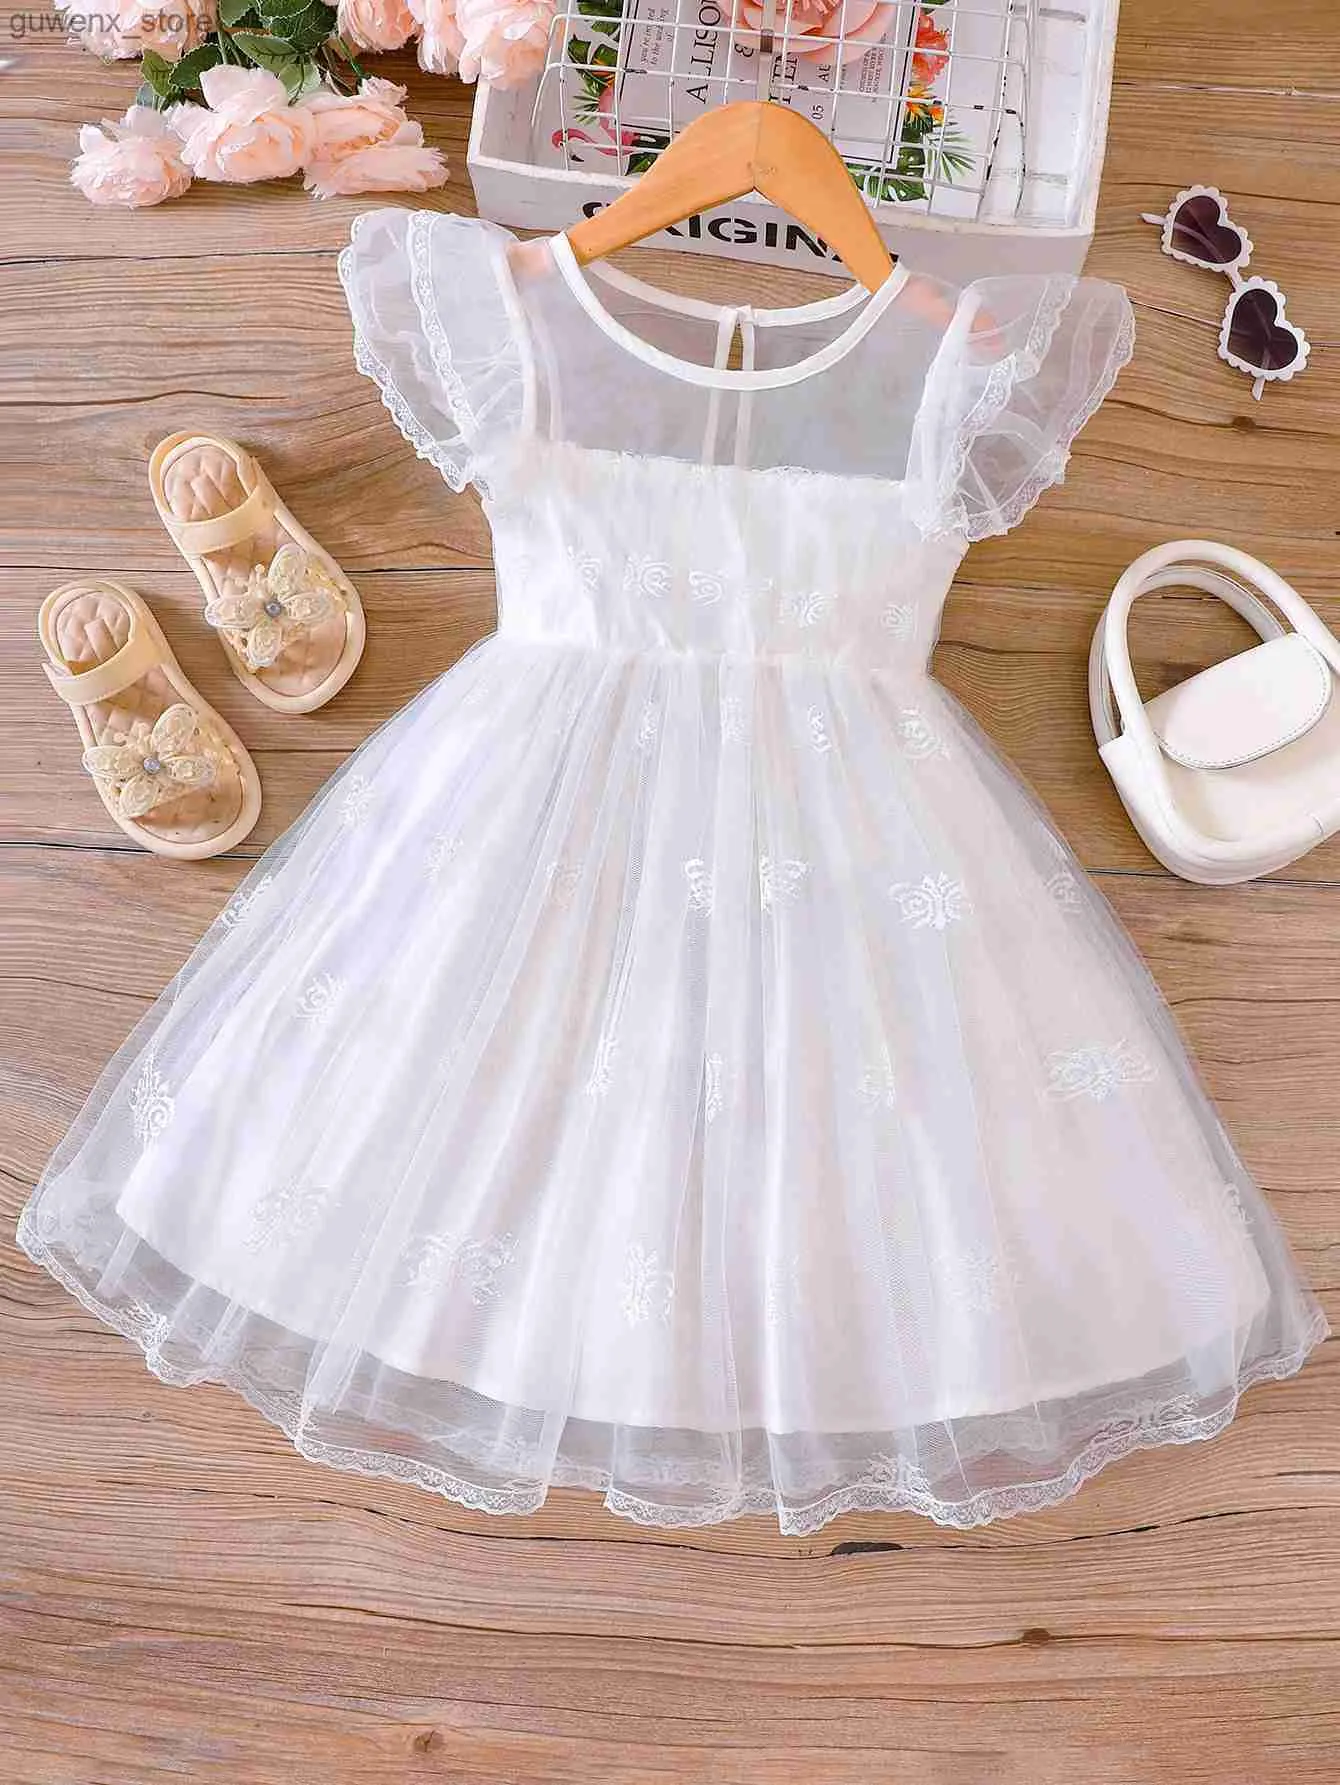 Girl's Dresses Summer New Romantic And Elegant Dress For Primary And Secondary School Children White Mesh Girl Princess Dress Y240415